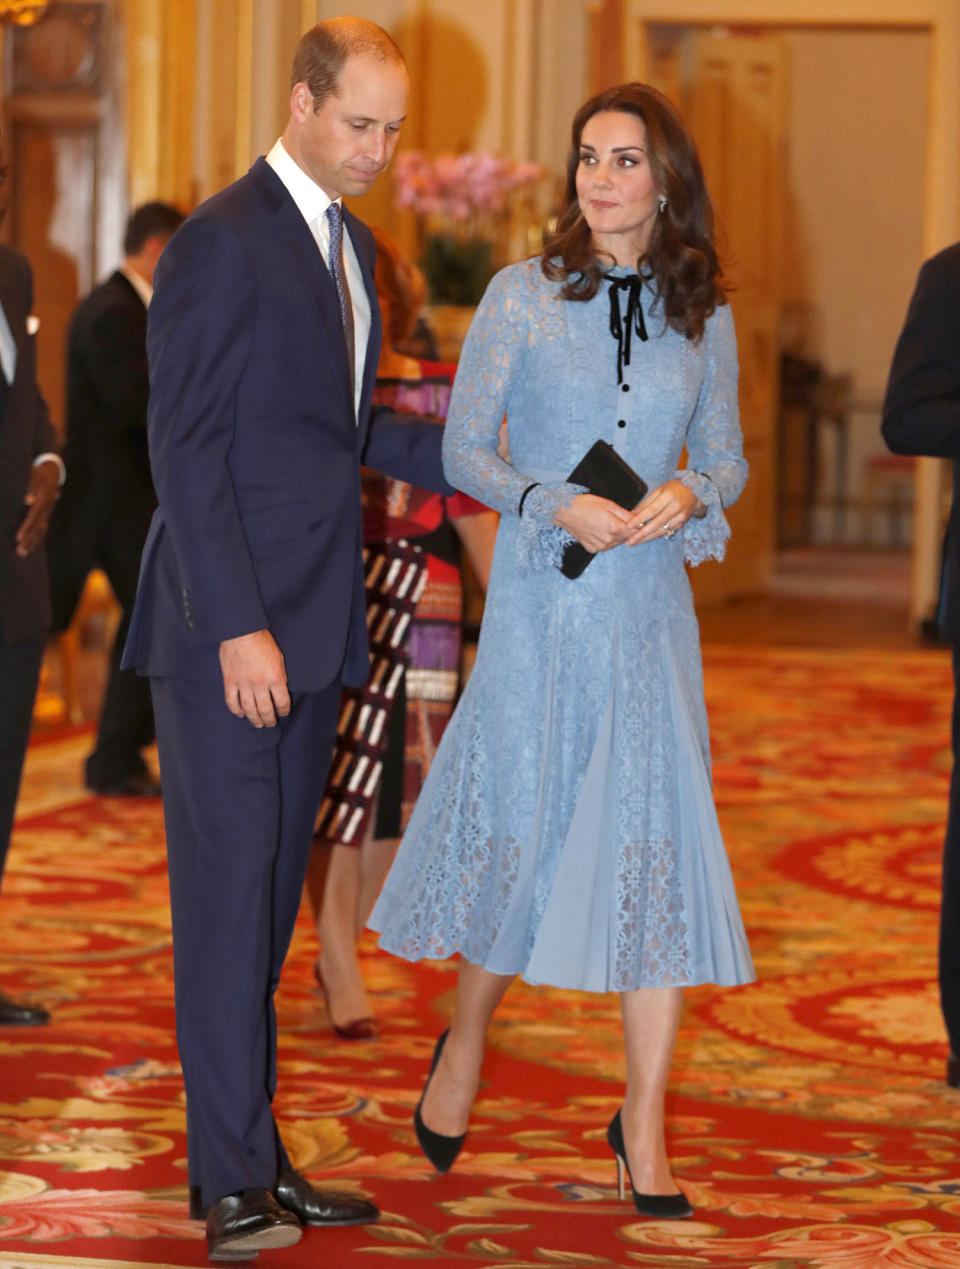 See Every Photo From Kate Middleton's Royal Baby Bump Debut!